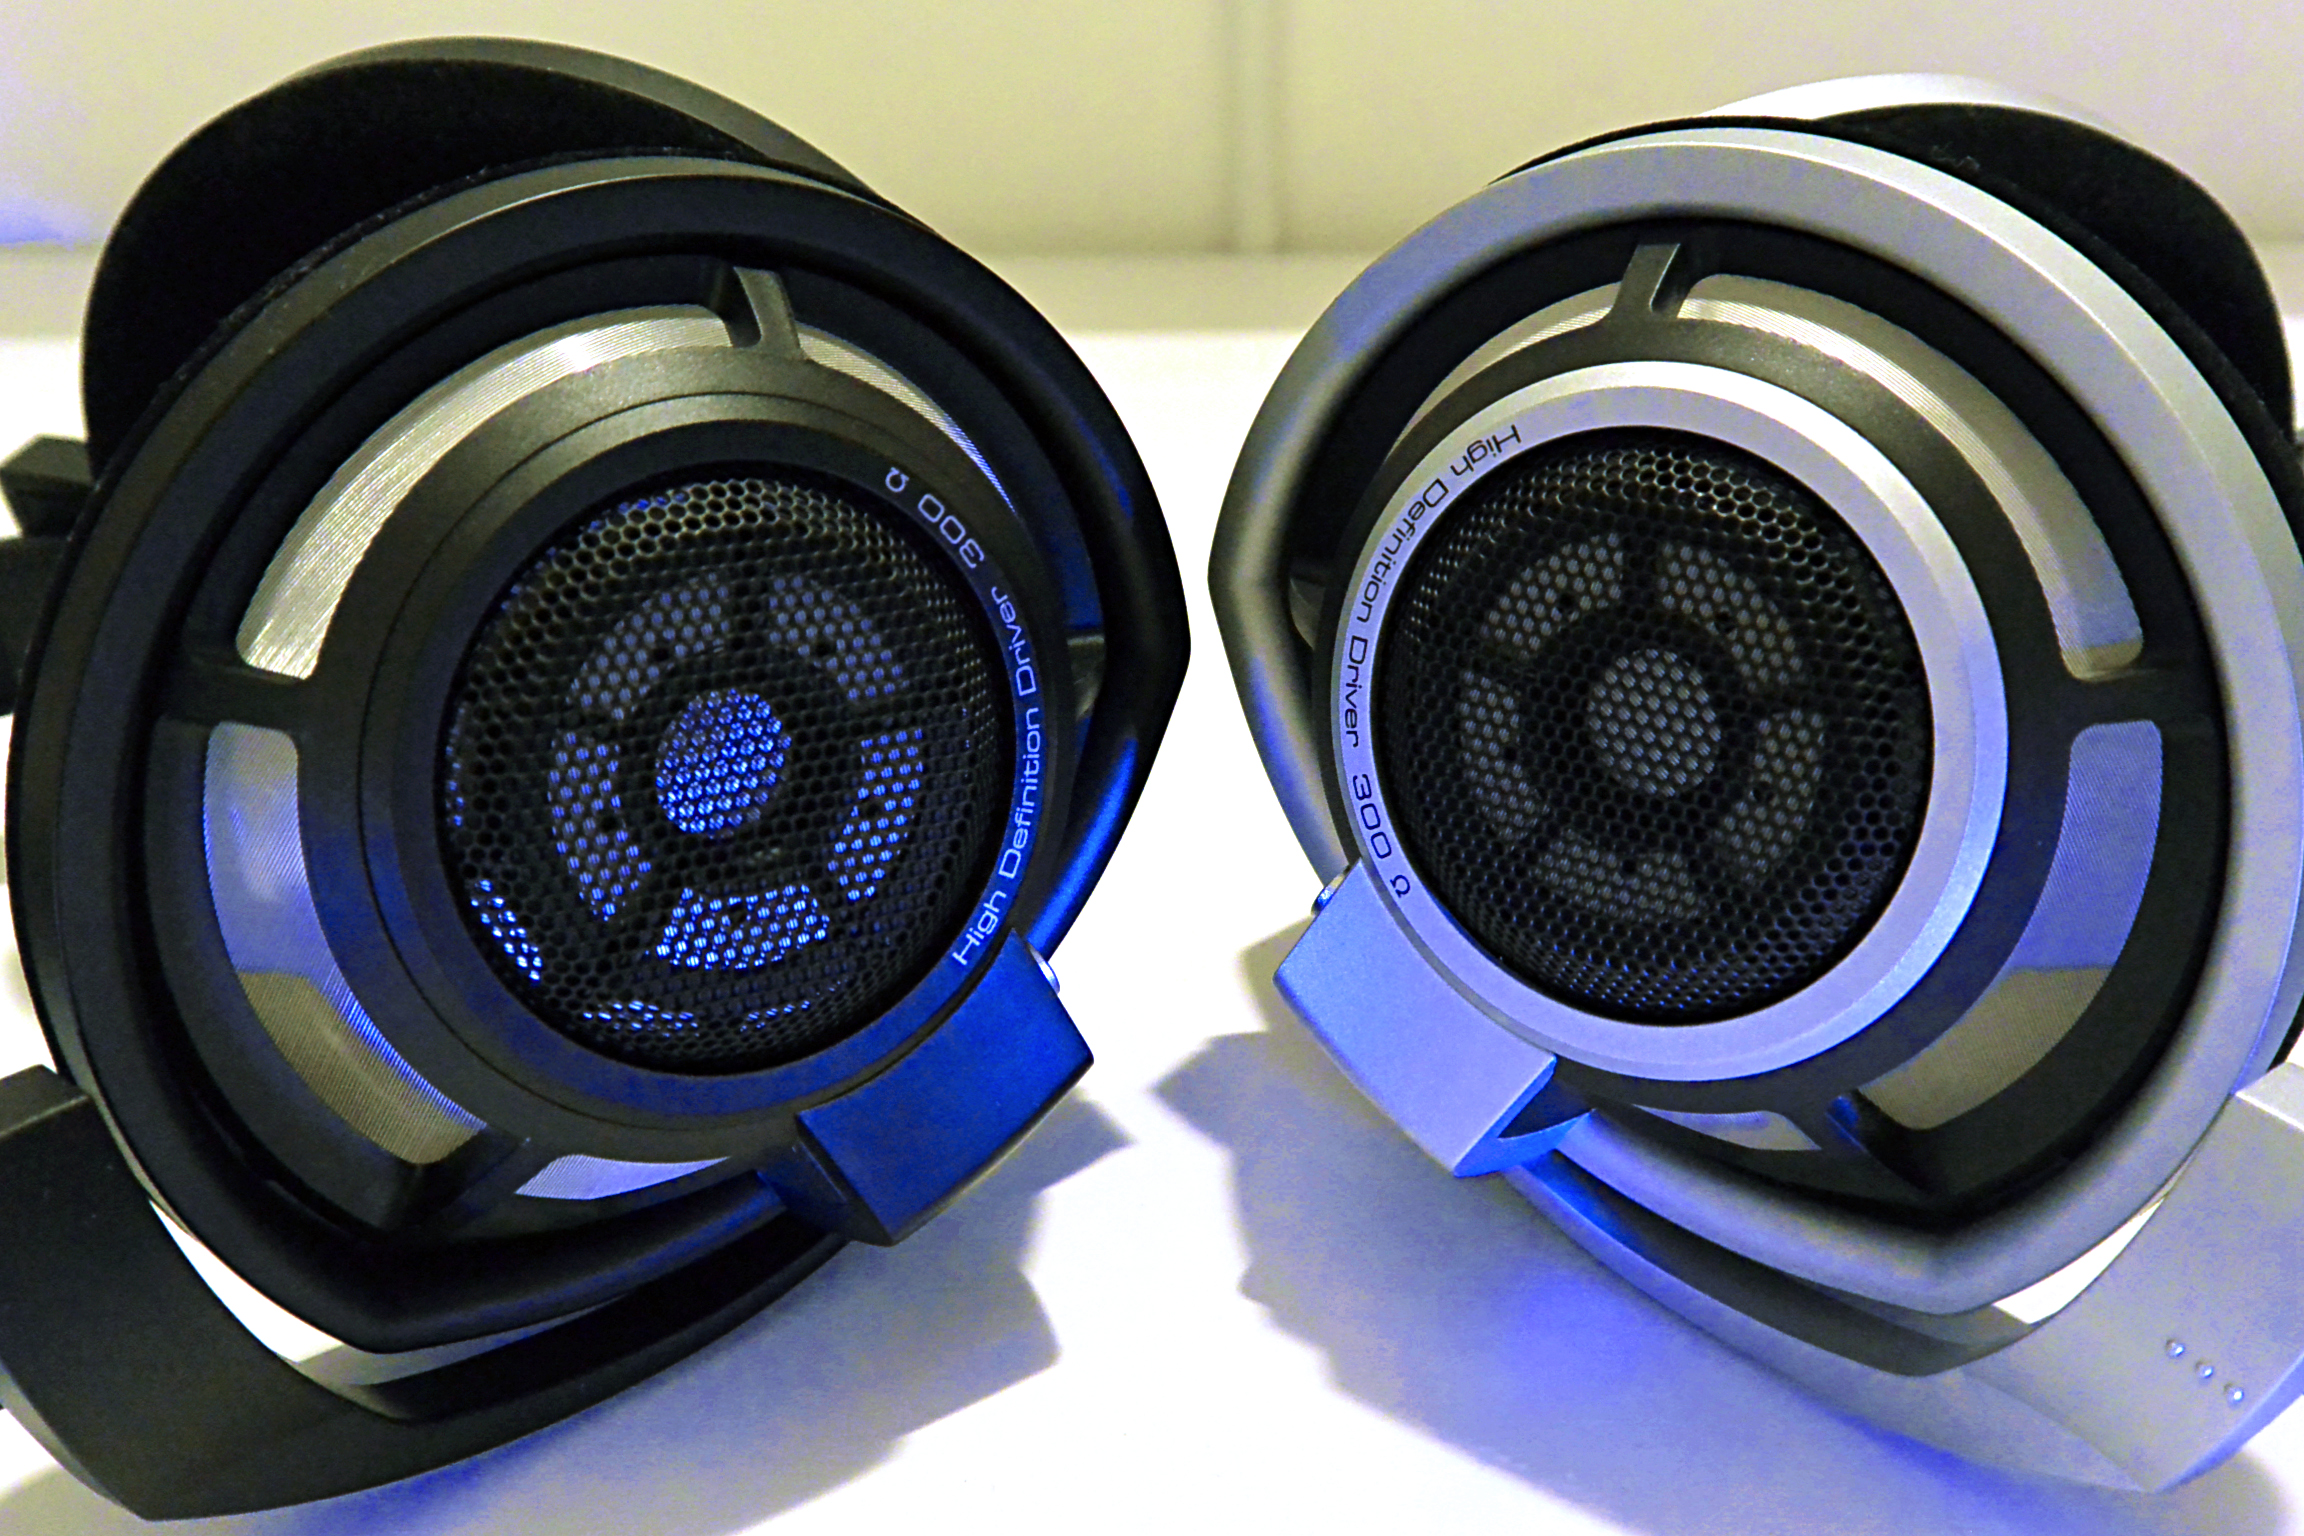 Sennheiser HD 800 S (left) and HD 800 (right)